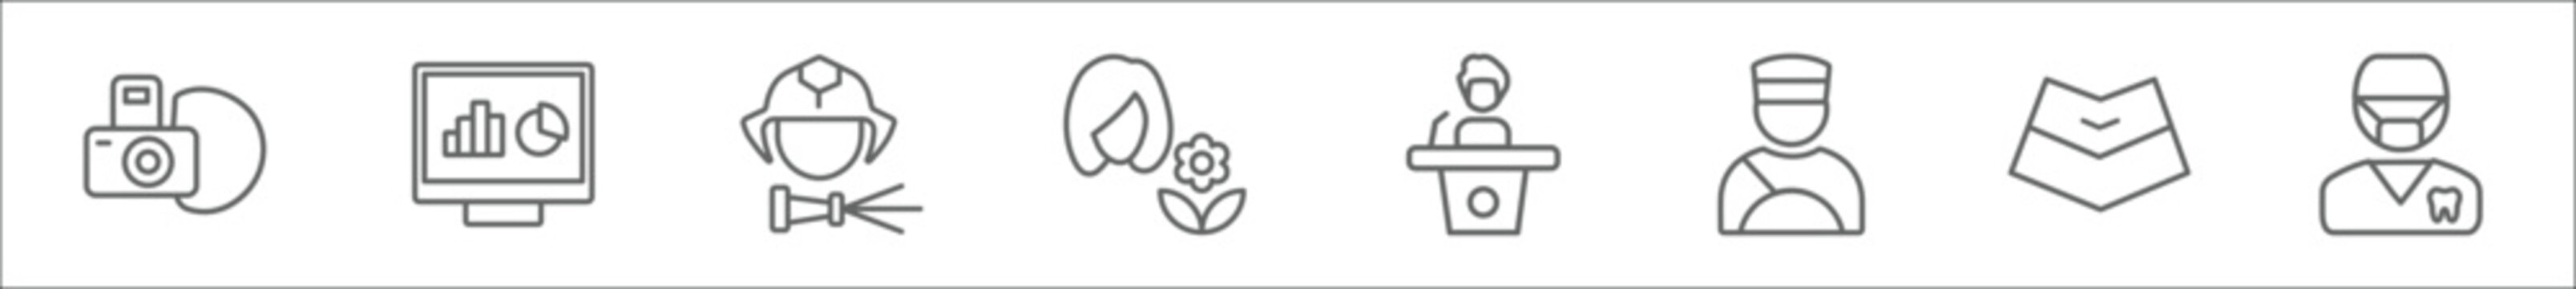 outline set of professions line icons. linear vector icons such as photographer, computer systems analyst, fireman, florist, politician, driver, air hostess, orthodontist